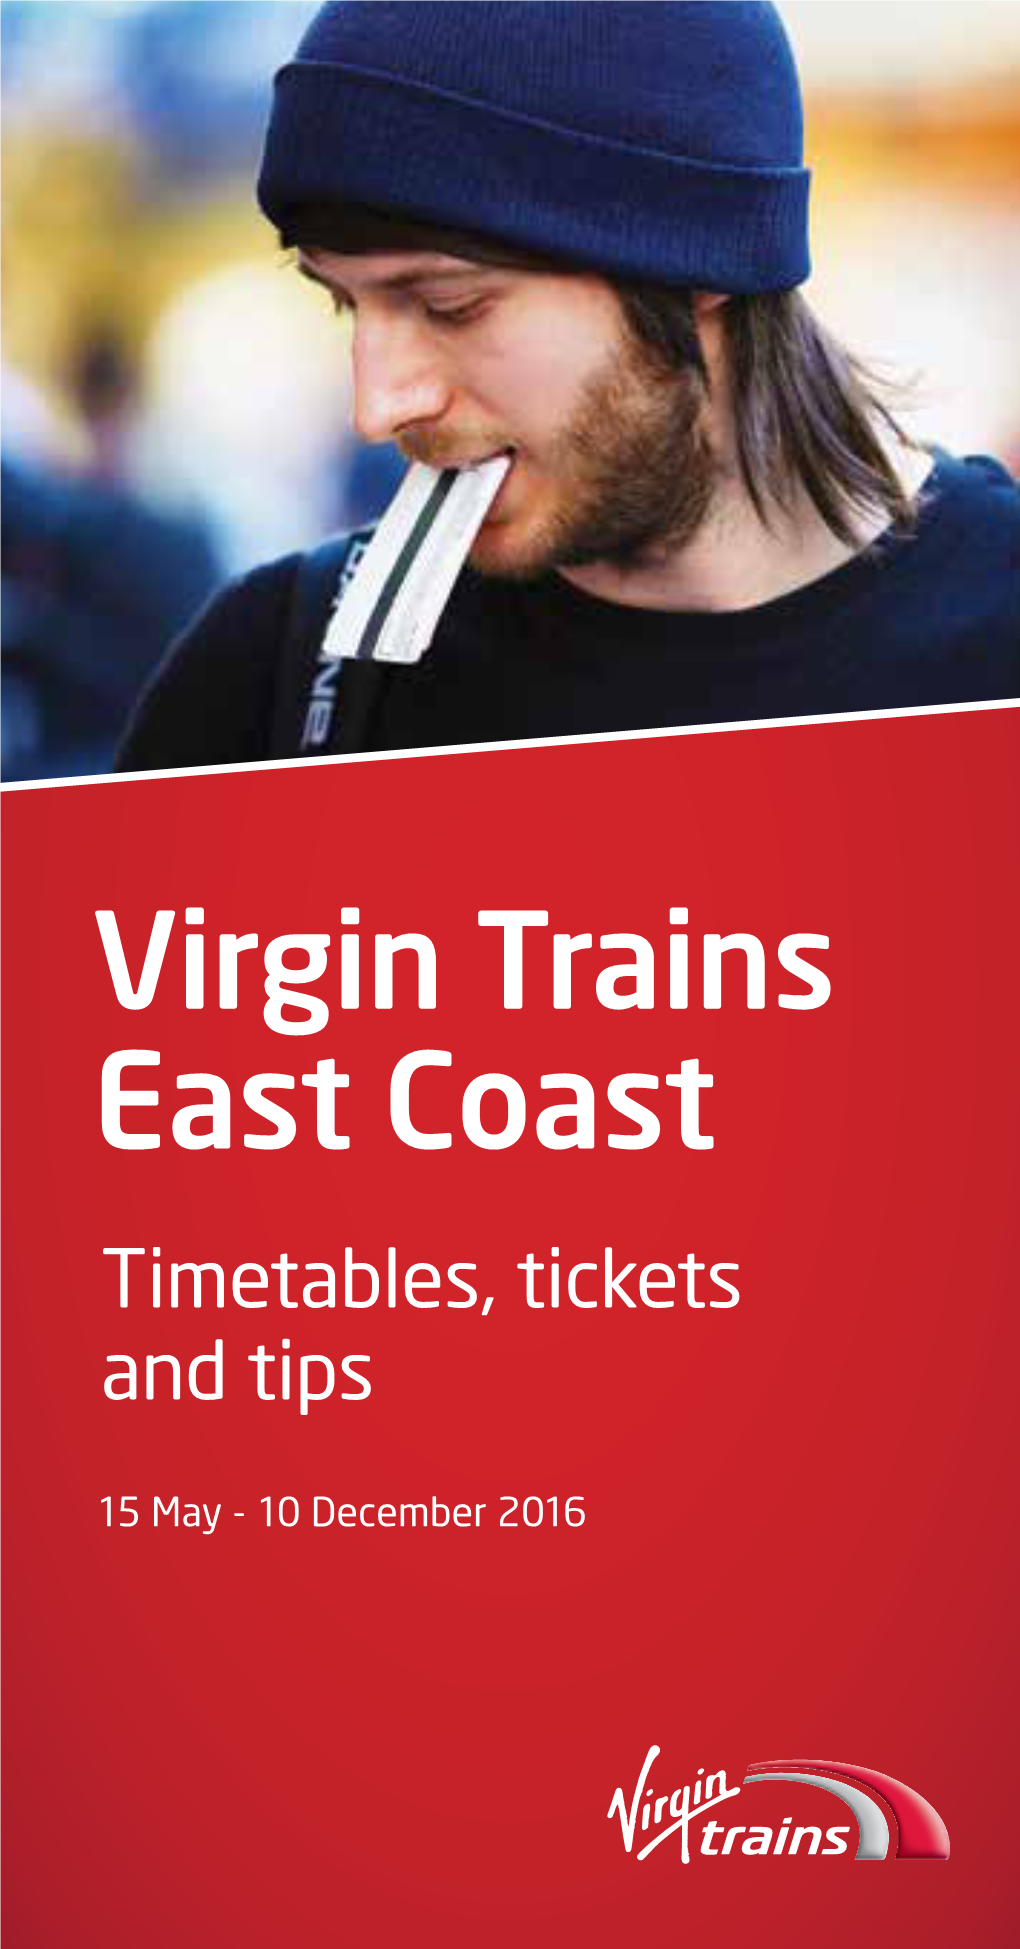 Virgin Trains East Coast Timetables, Tickets and Tips